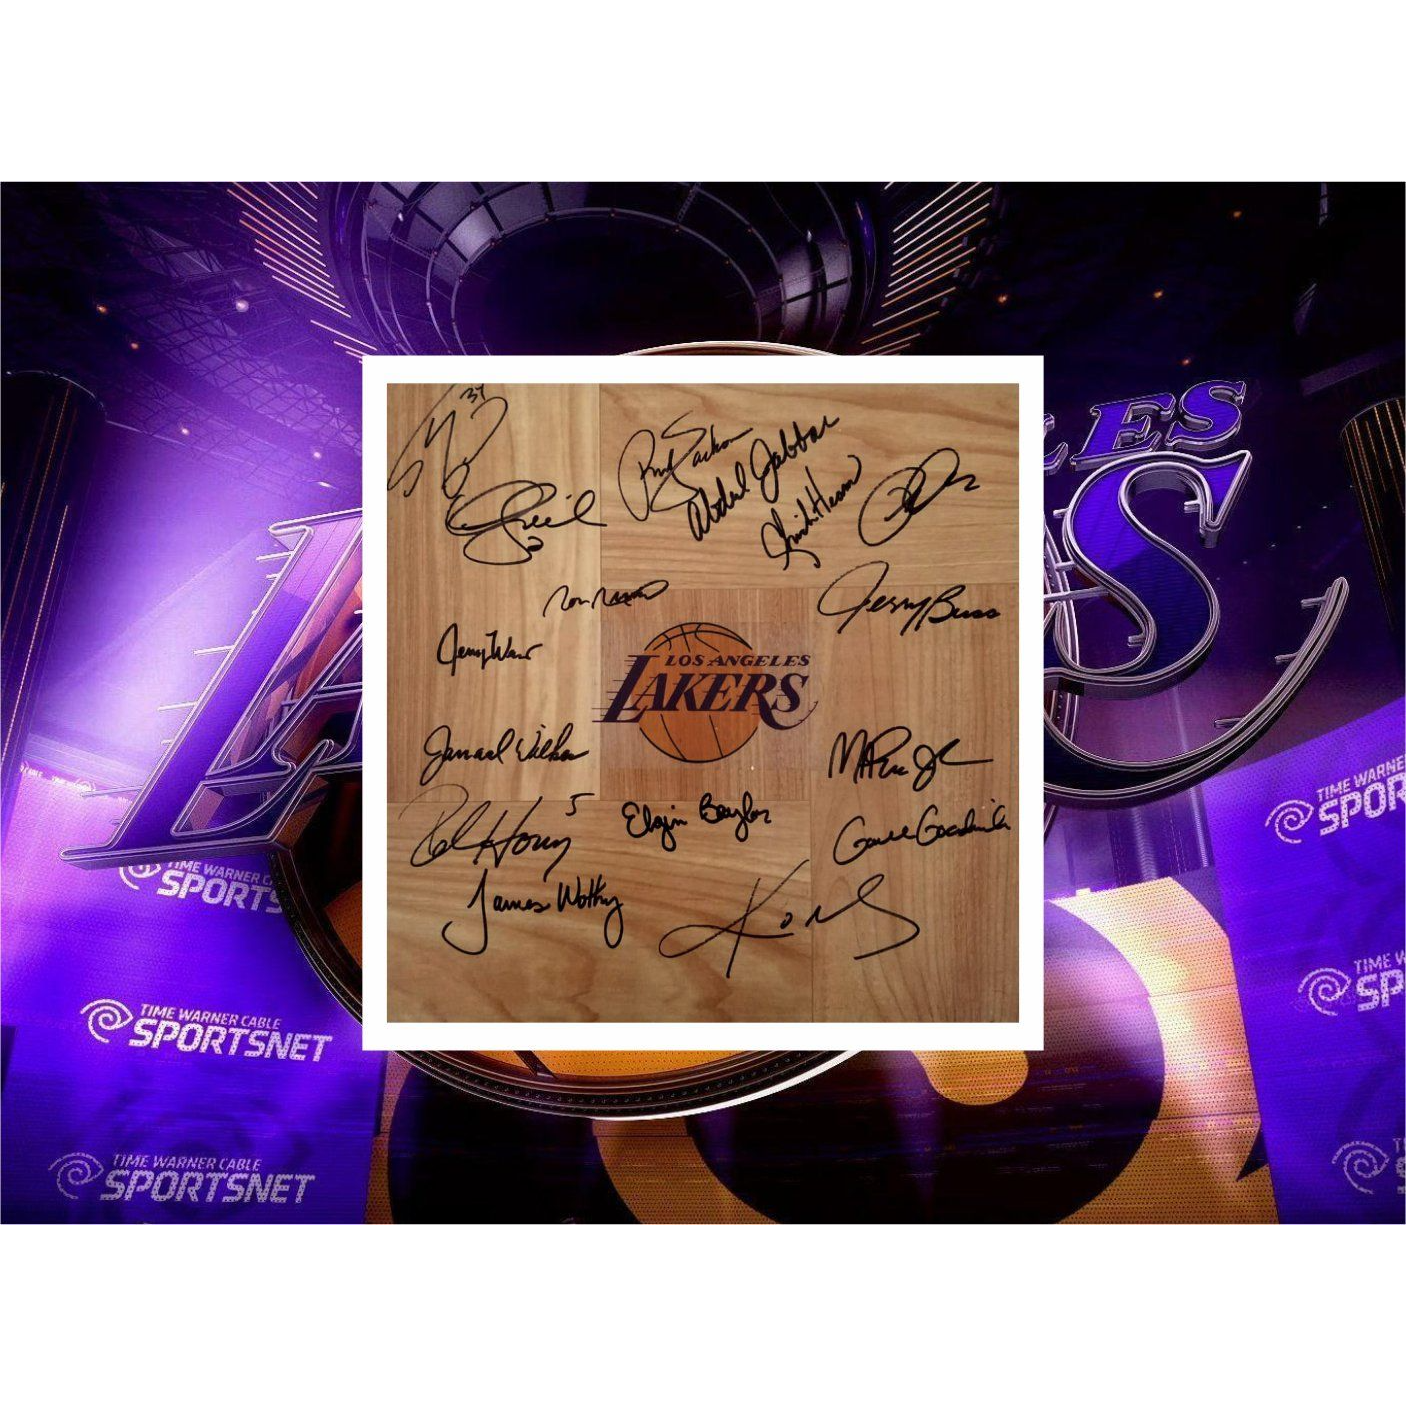 Shaquille O'Neal Los Angeles Lakers Autographed 2000 NBA Finals